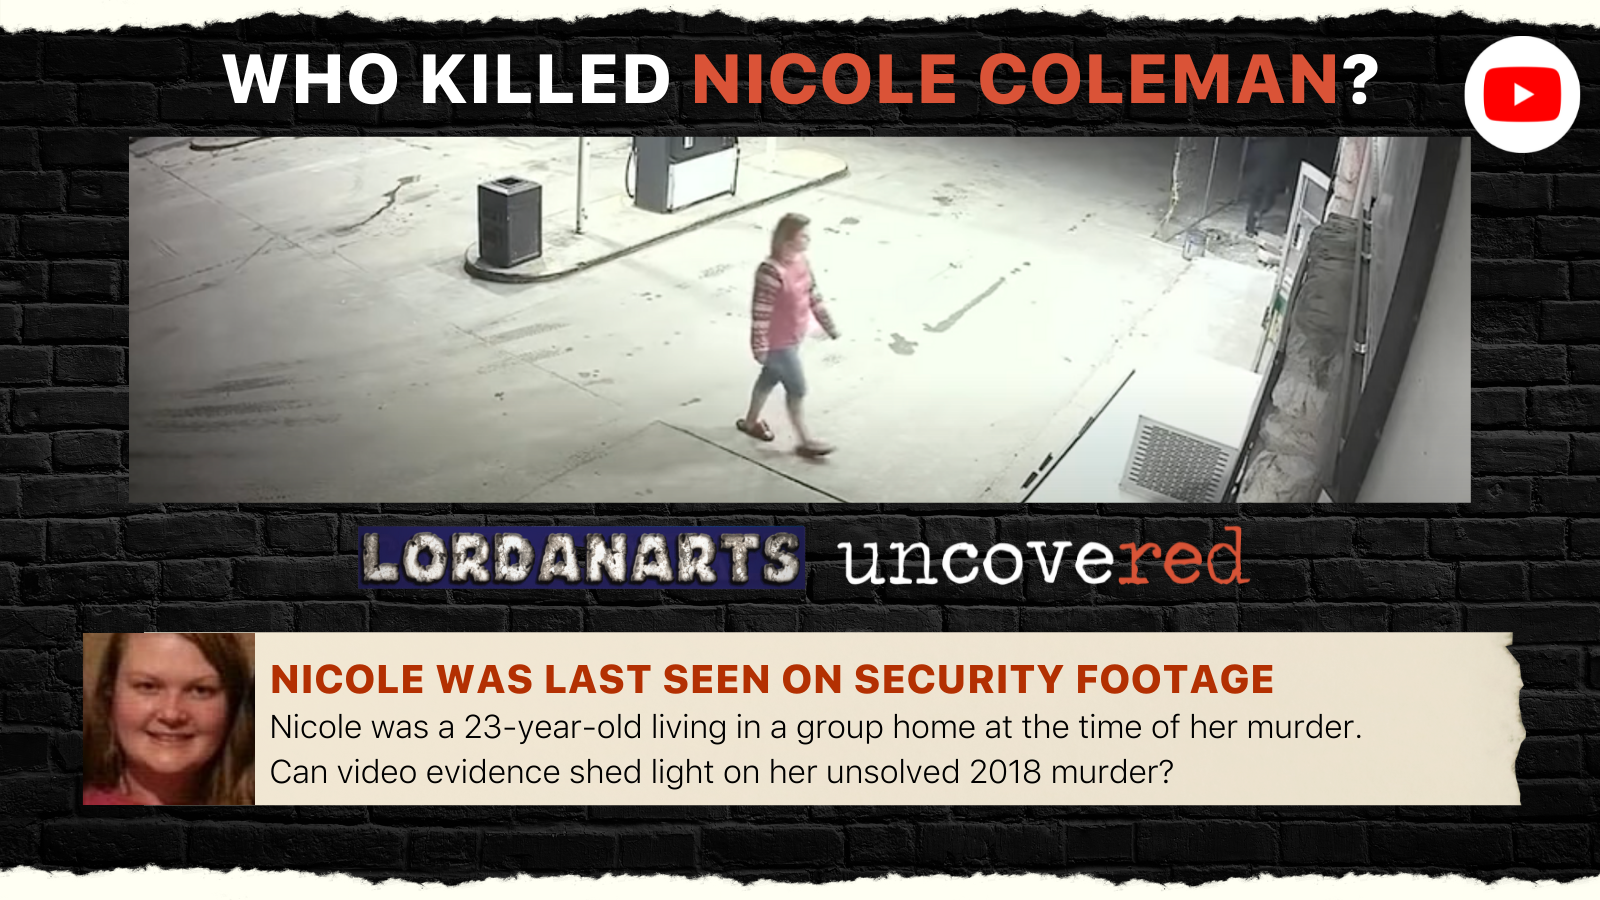 A screenshot of the surveillance footage where Nicole Coleman was last seen alive.